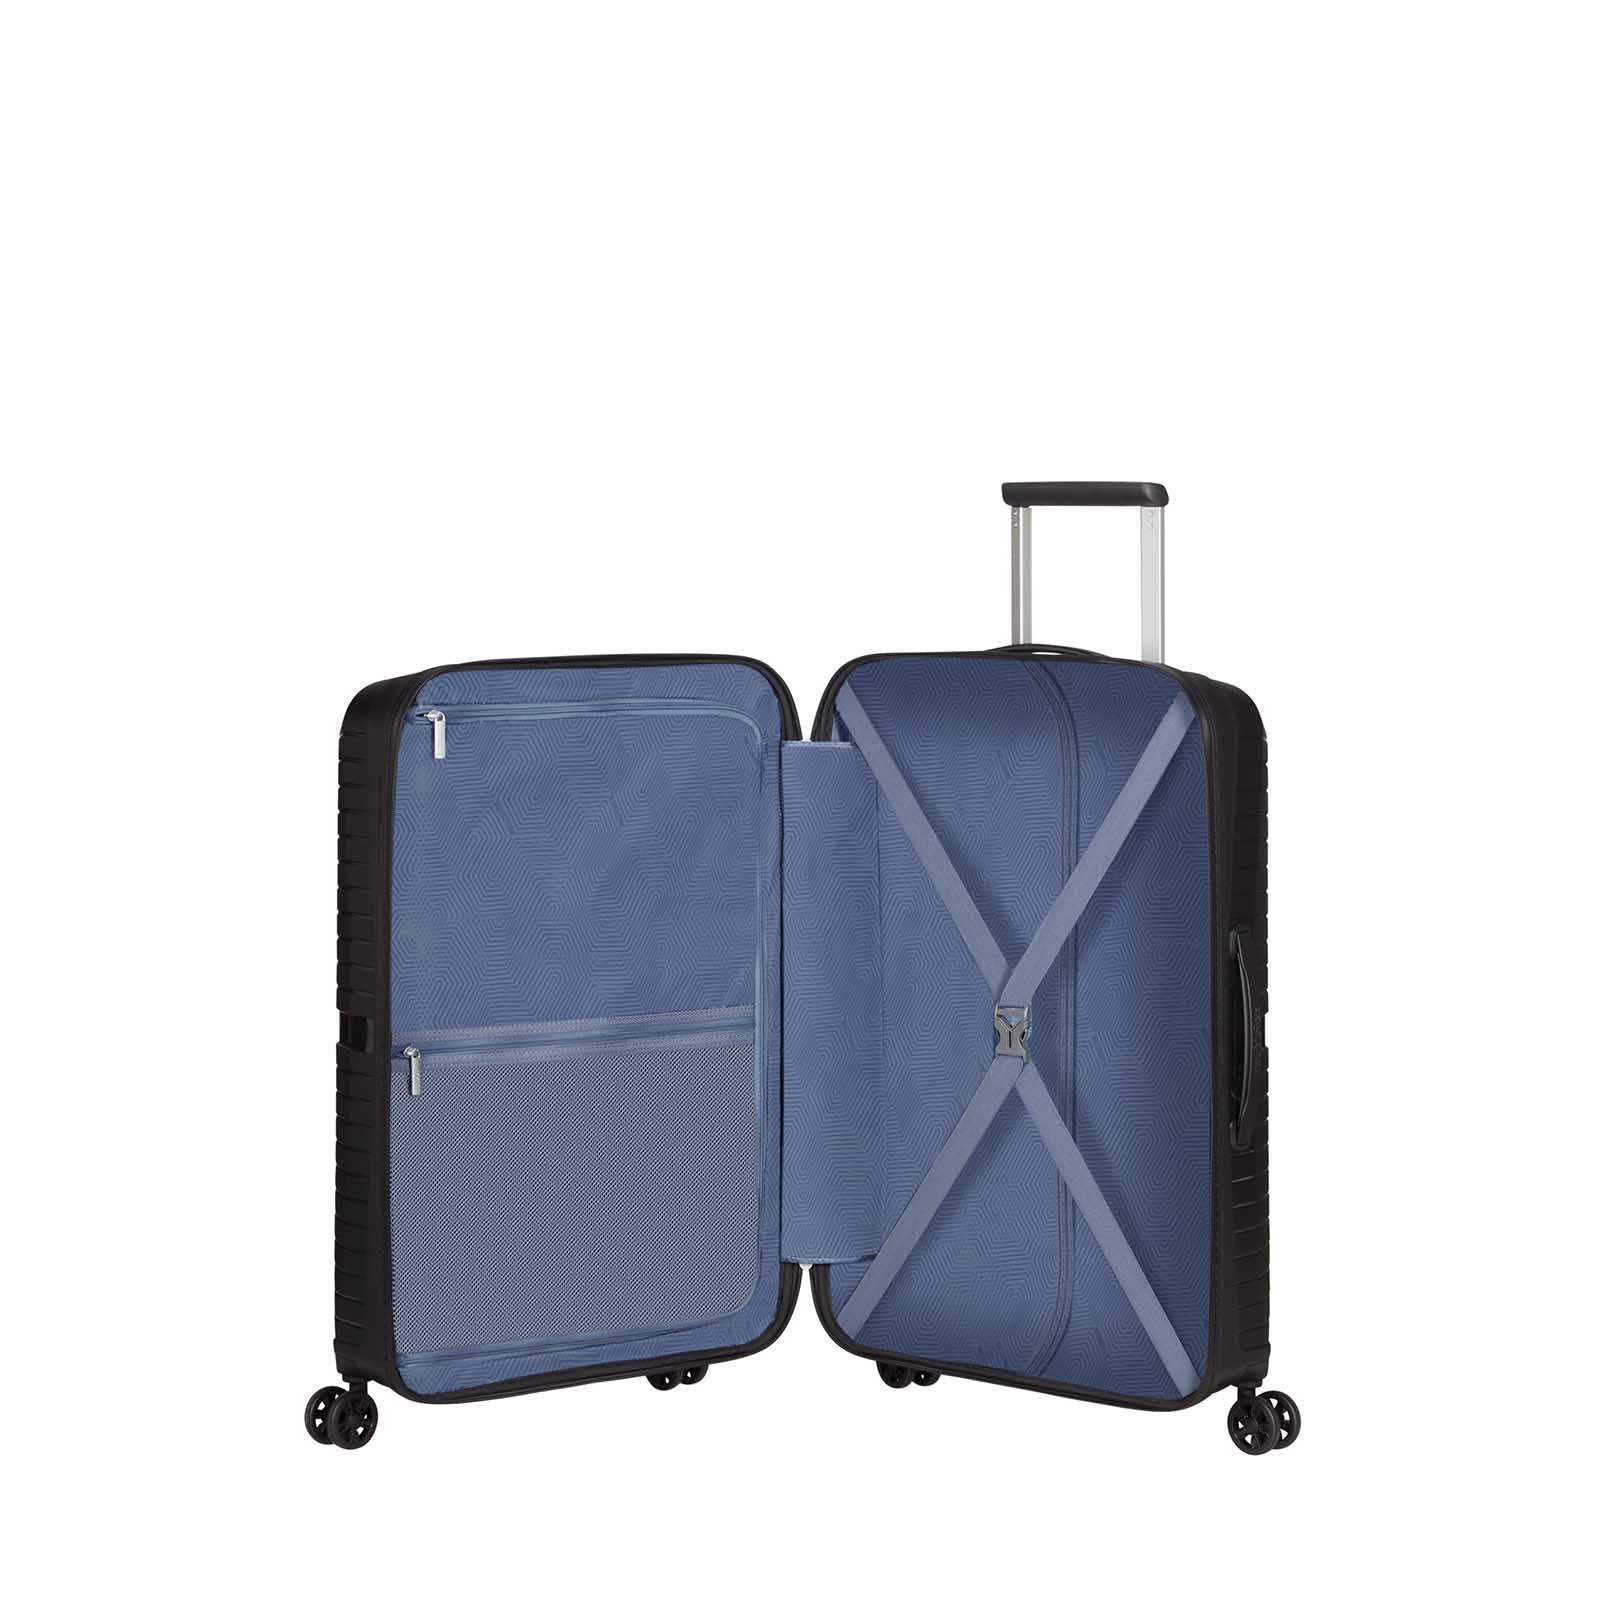 American-Tourister-Airconic-77cm-Suitcase-Onyx-Black-Open